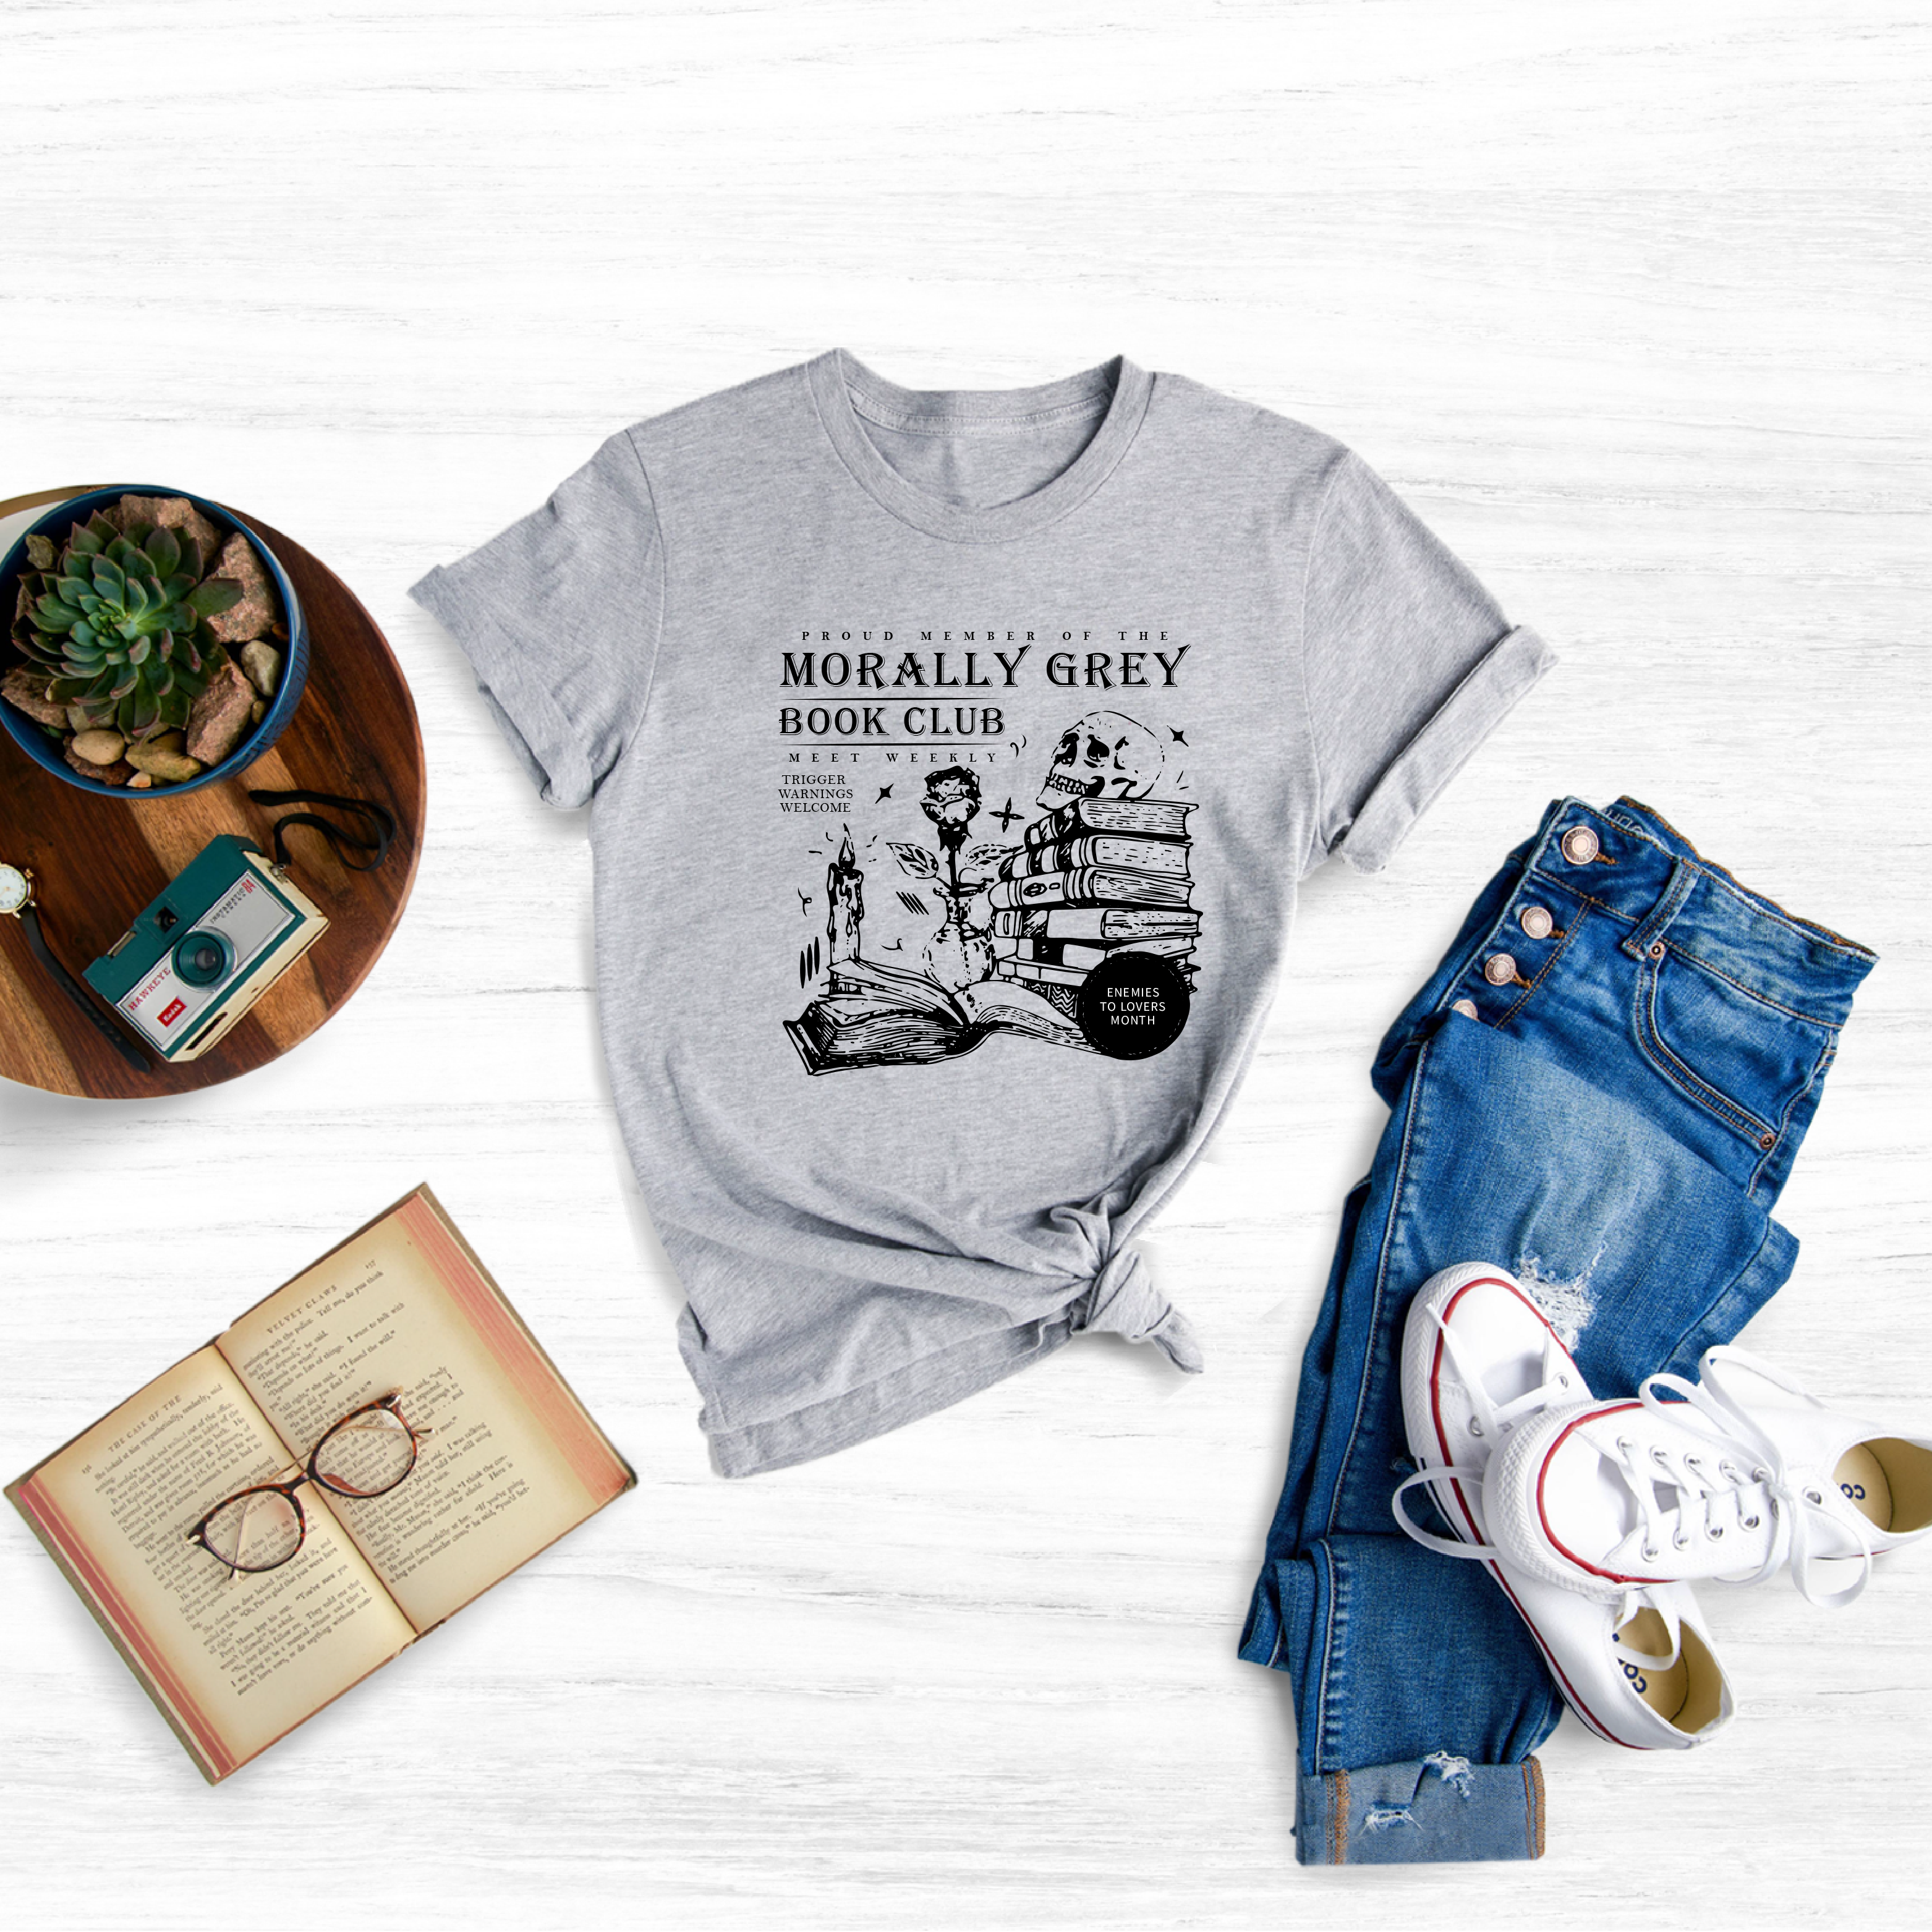 Delve into the World of Morally Grey Literature with the Enchanting "Morally Grey Book Club Shirt, Spooky Season T-shirt"